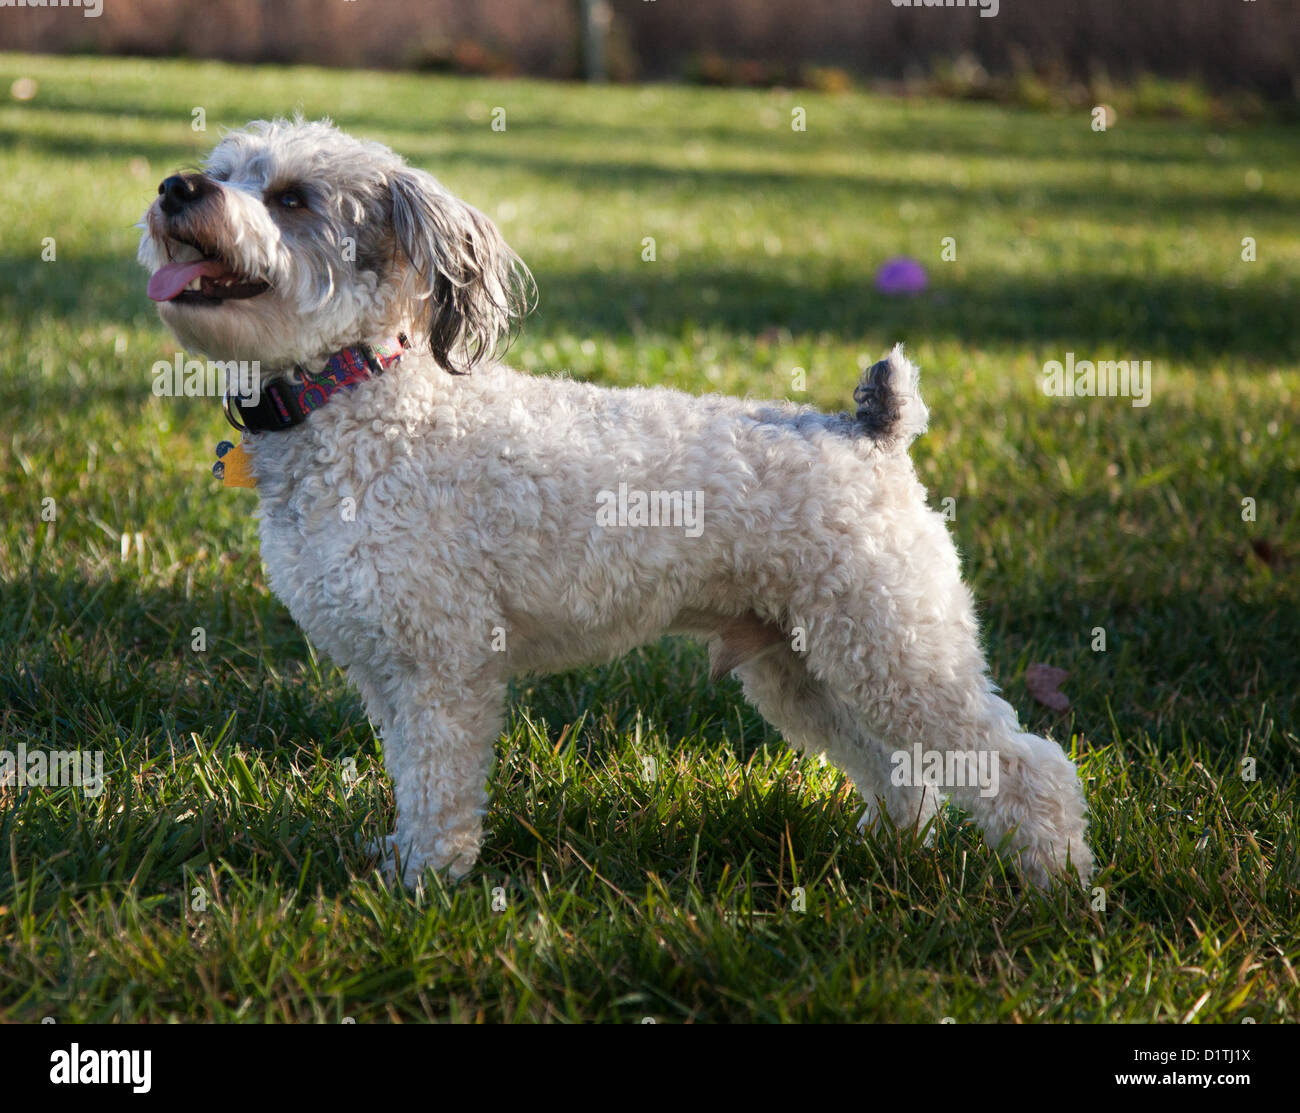 A schnoodle dog. Stock Photo